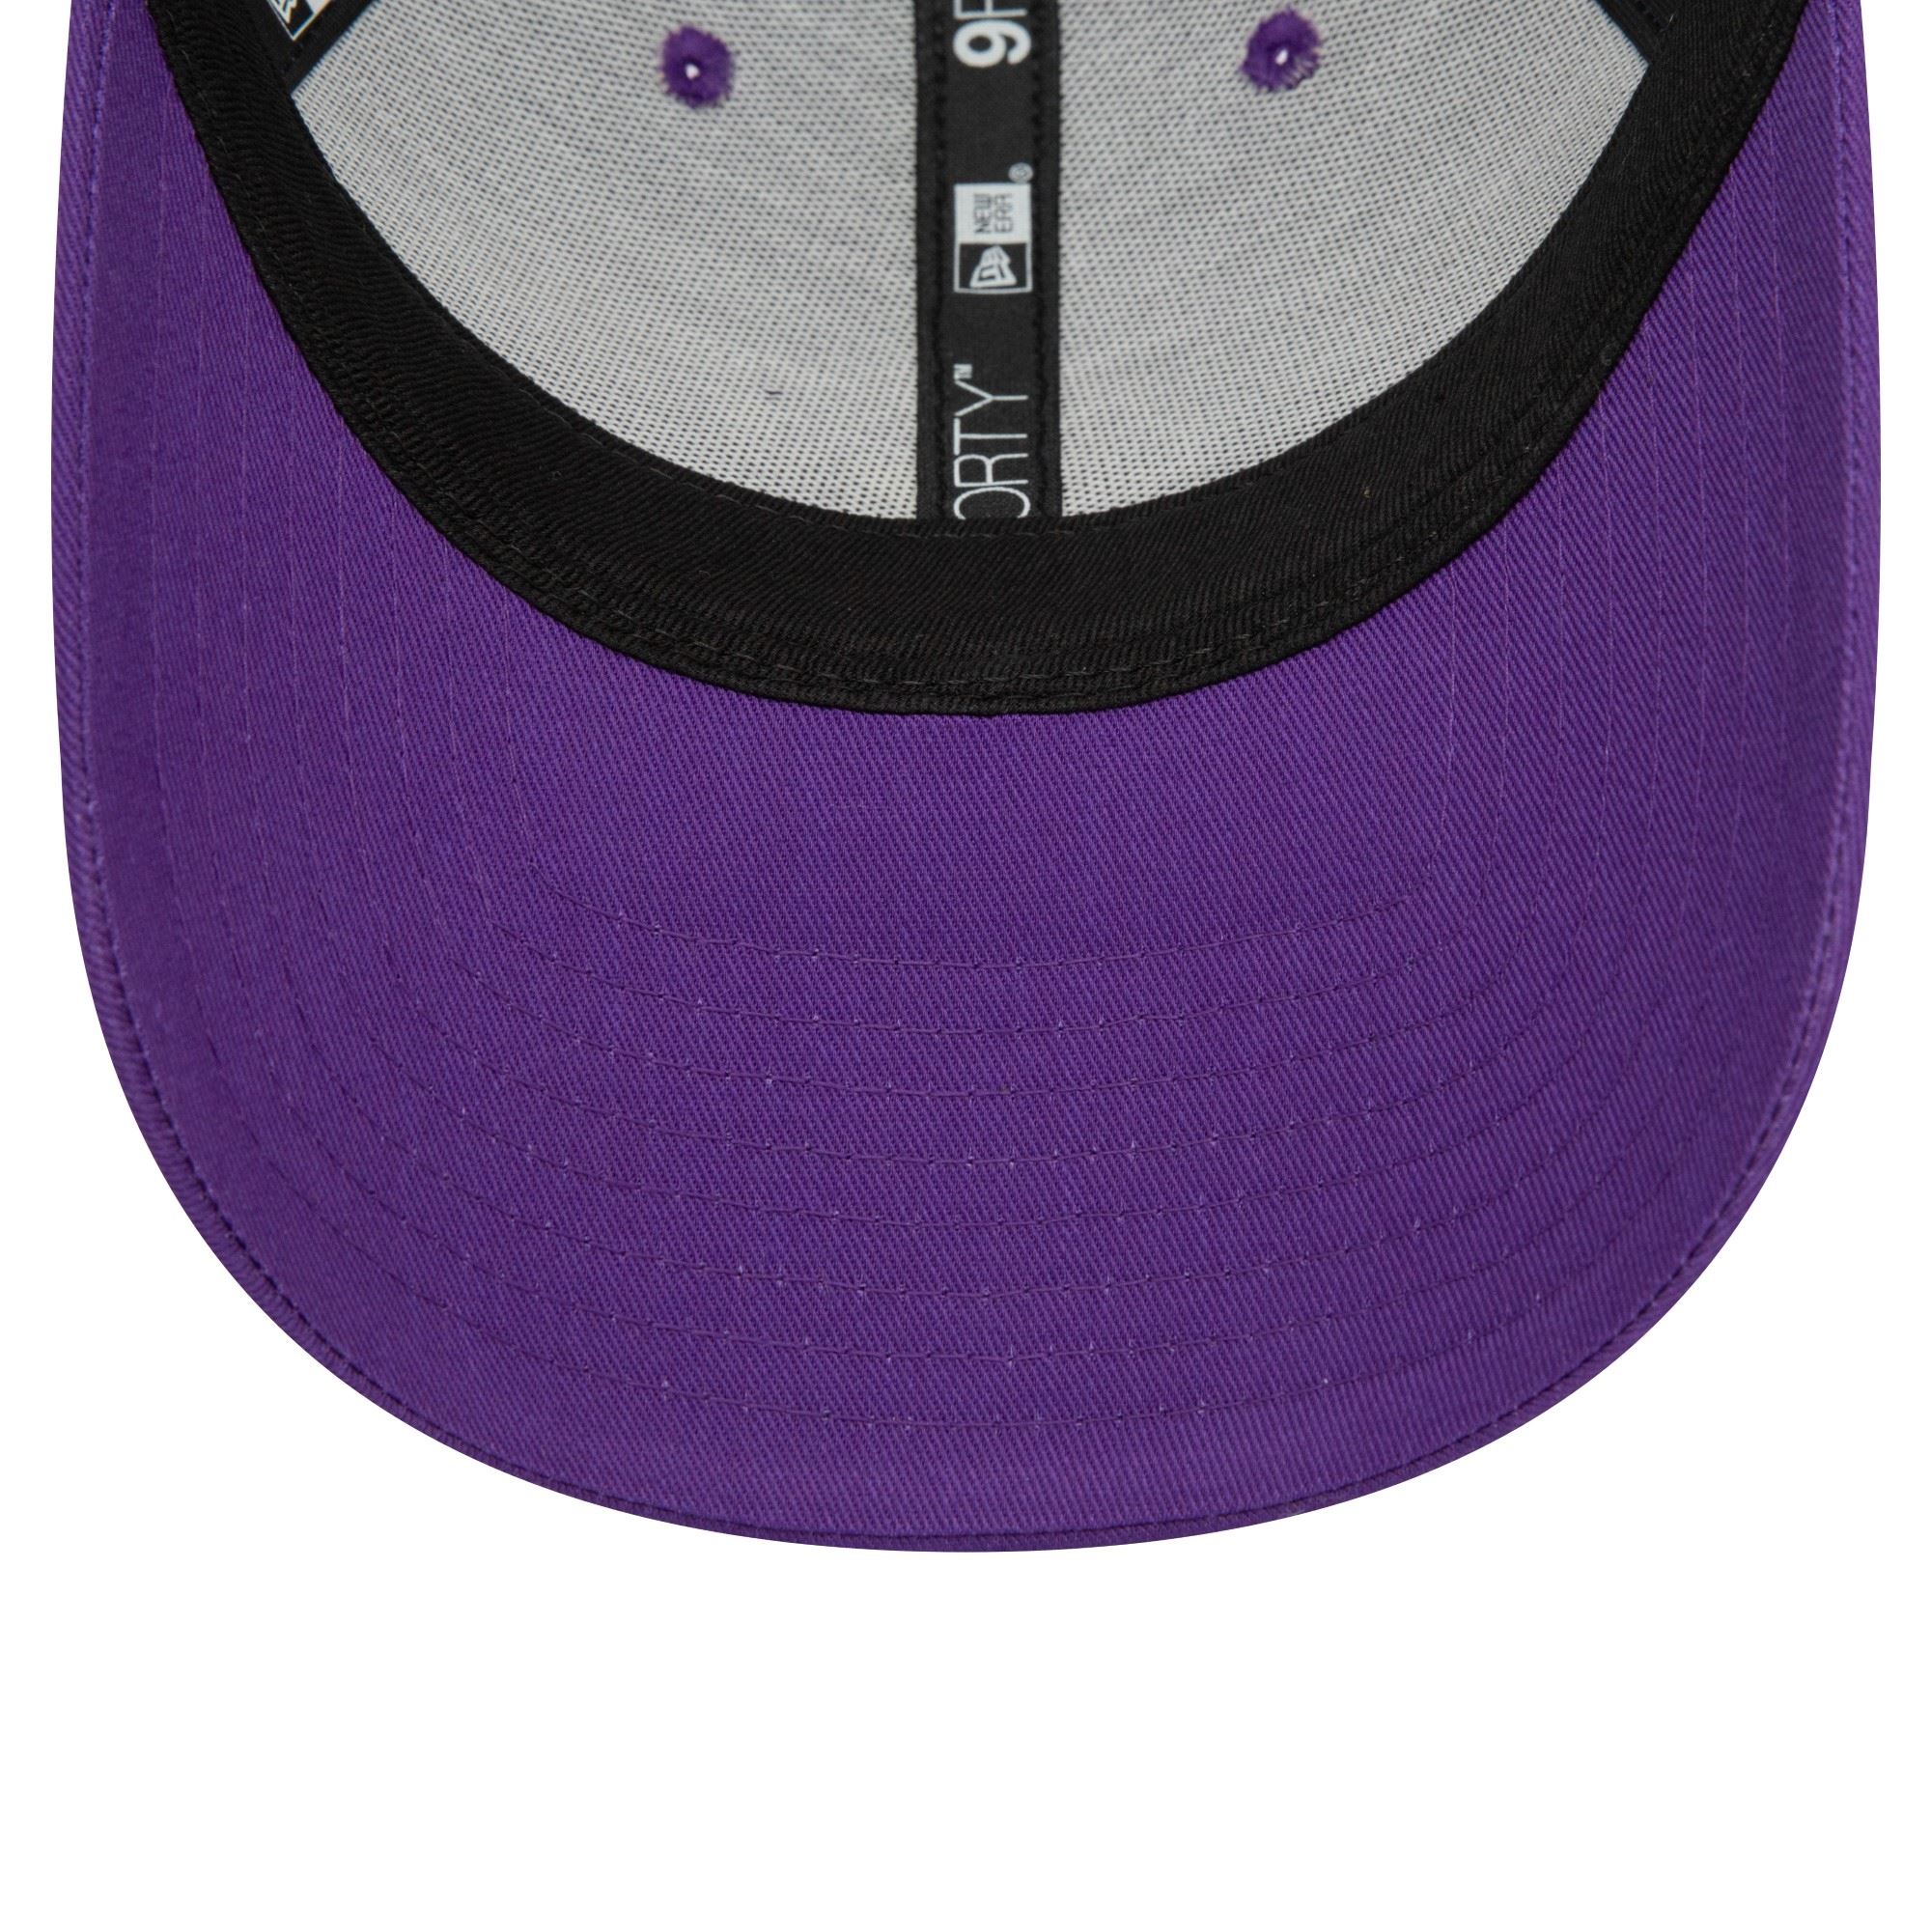 Los Angeles Lakers NBA Home Field Purple 9Forty A-Frame Adjustable Trucker Cap New Era